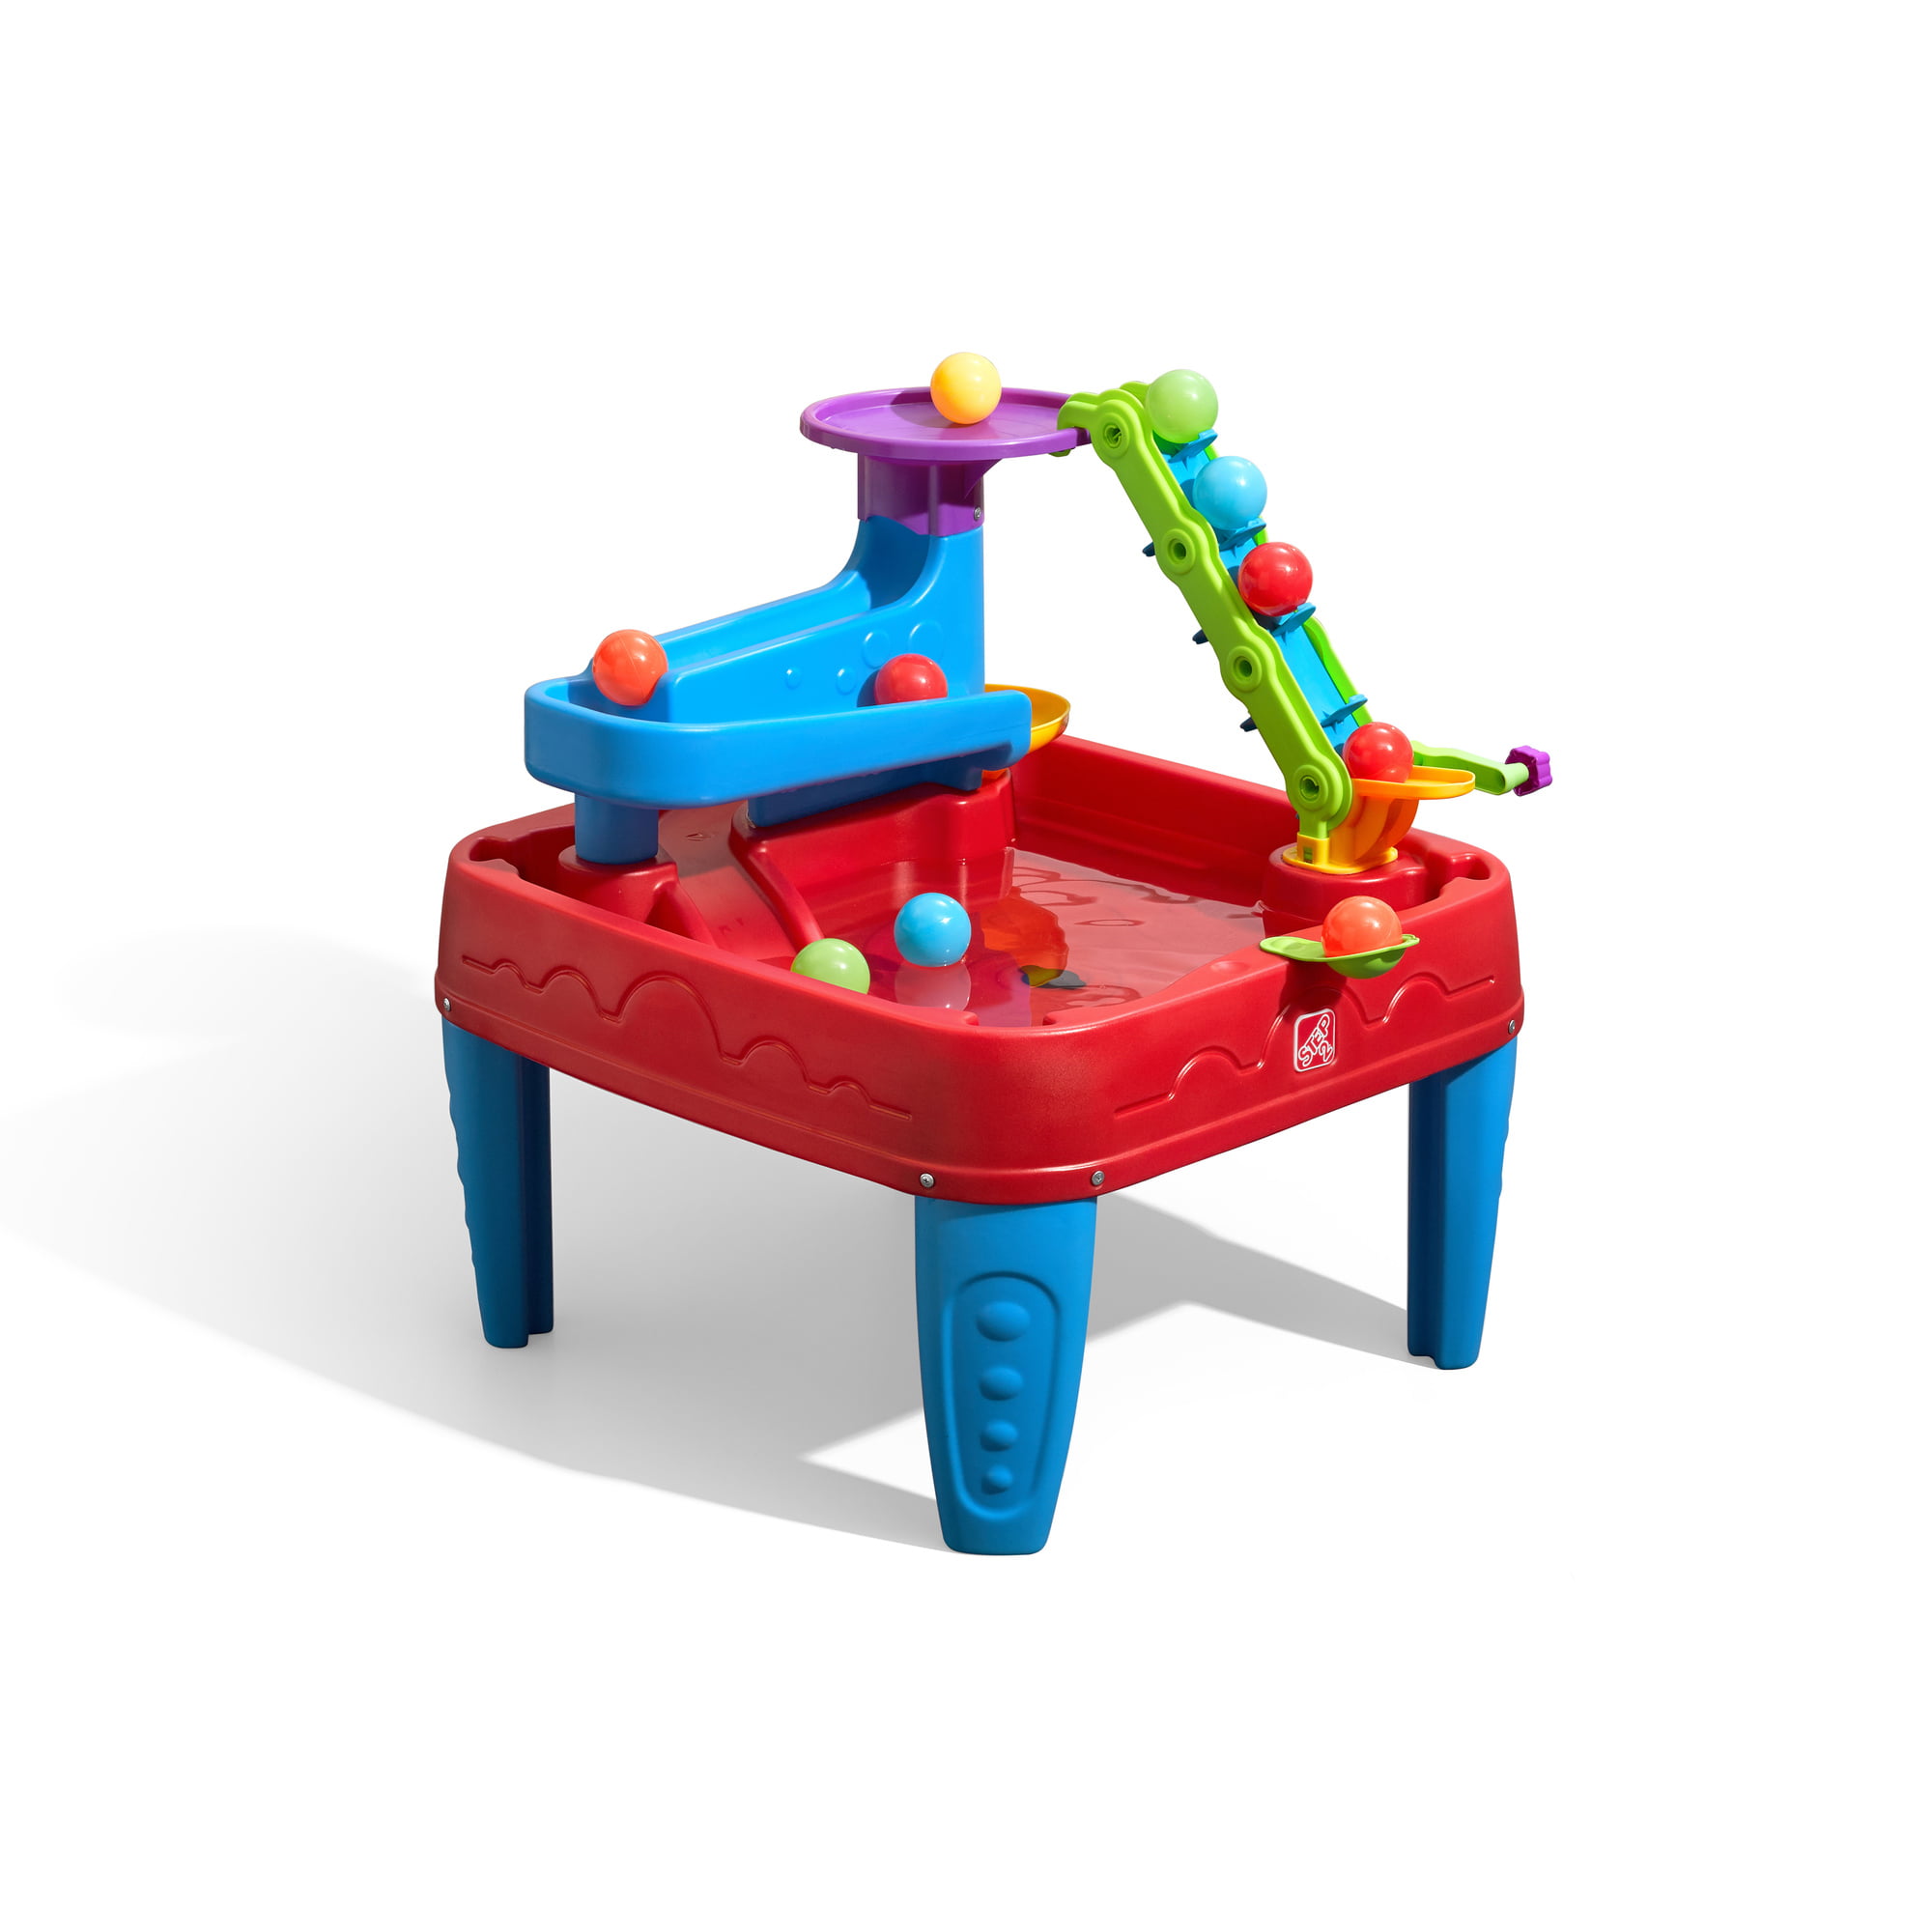 Step2 STEM Discovery Ball and Water Activity Table for toddlers